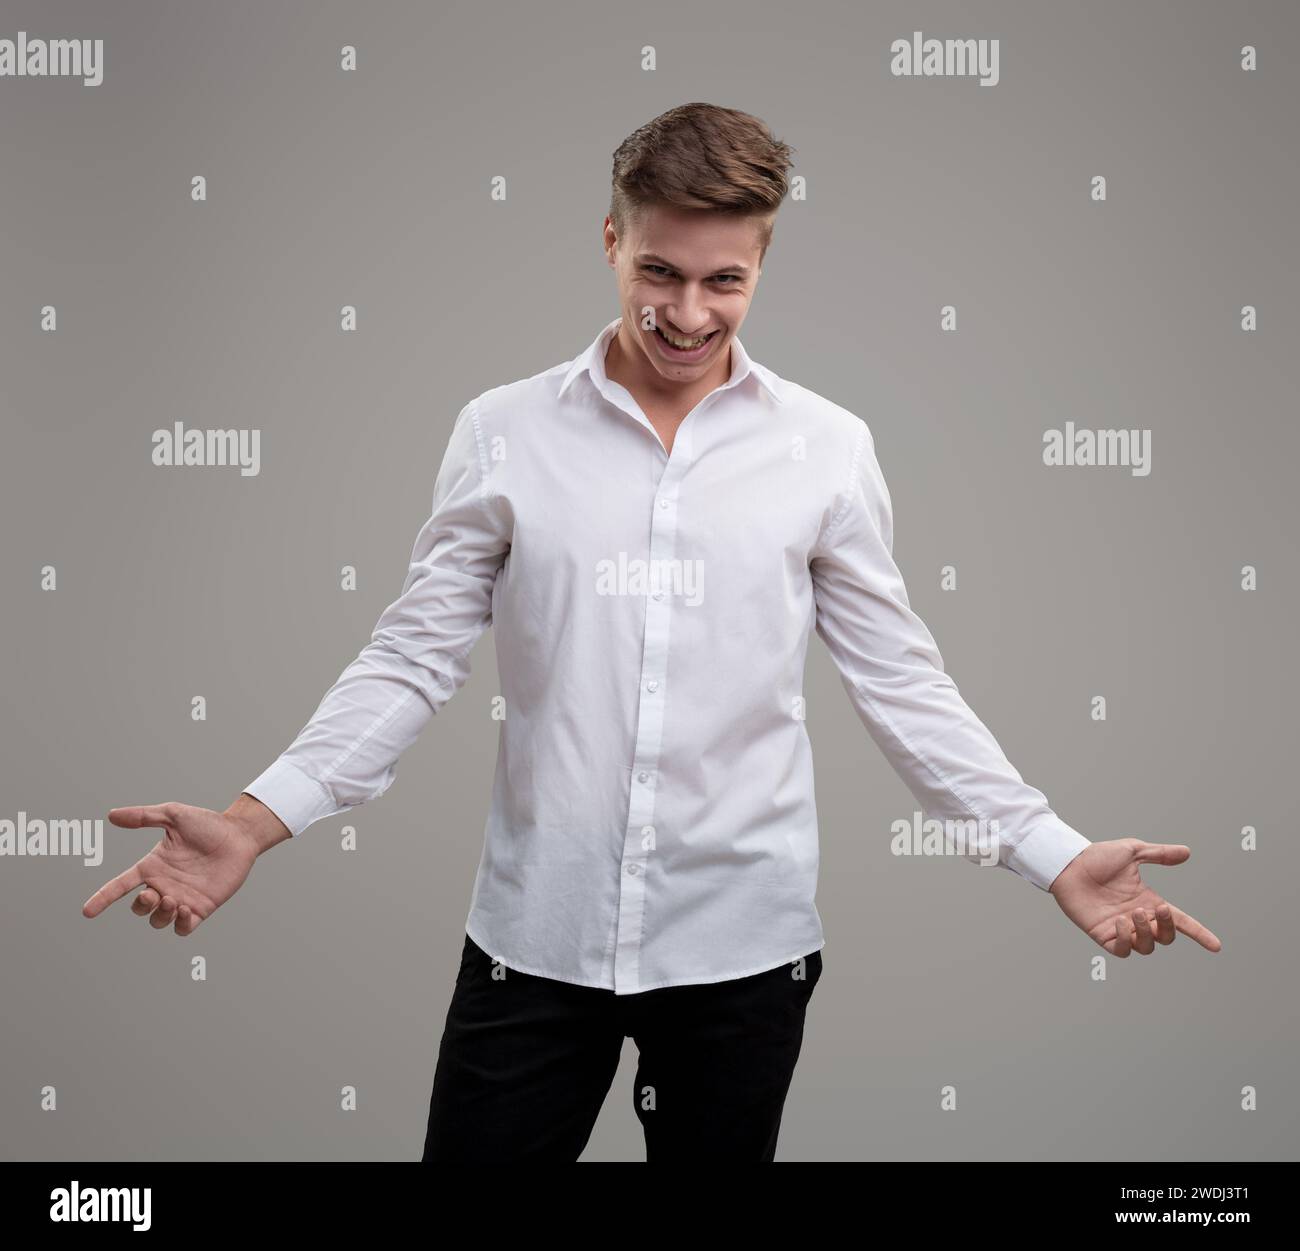 Young man's gesture in white shirt symbolizes openness to new experiences and social connection Stock Photo